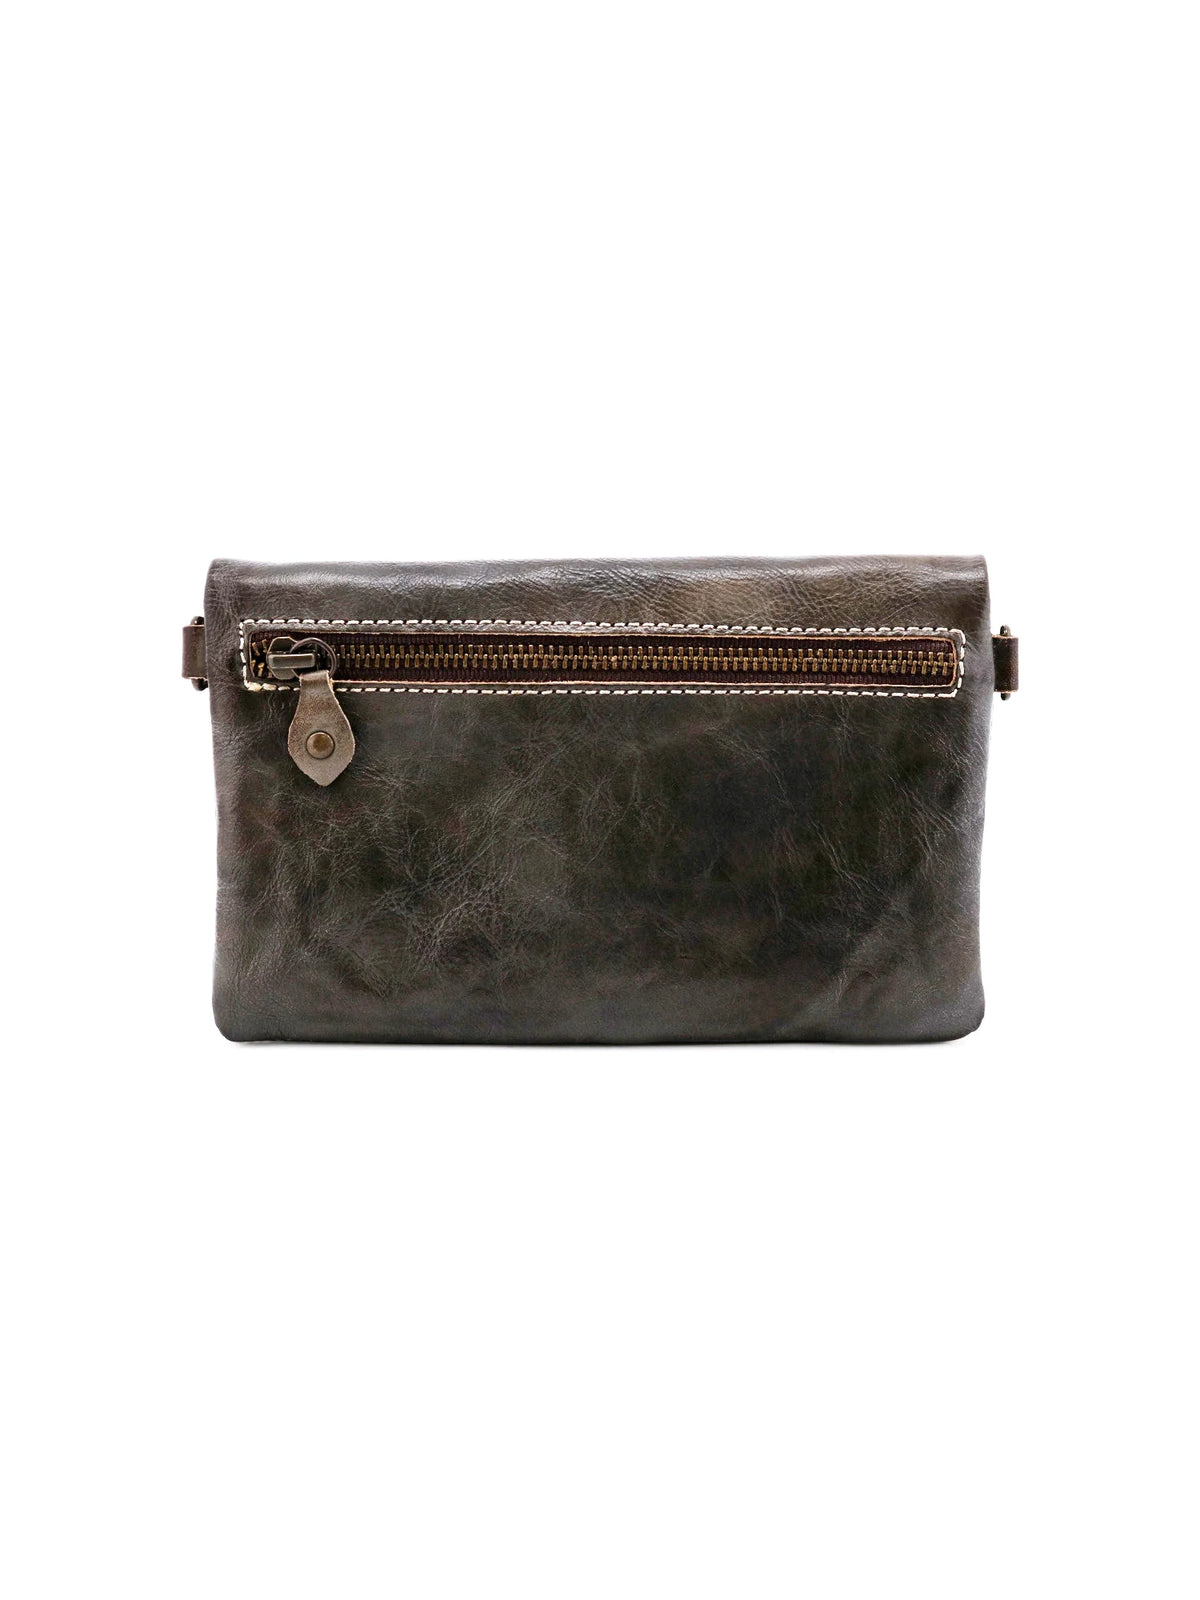 BEDSTU cadence convertible crossbody clutch wallet in taupe rustic leather